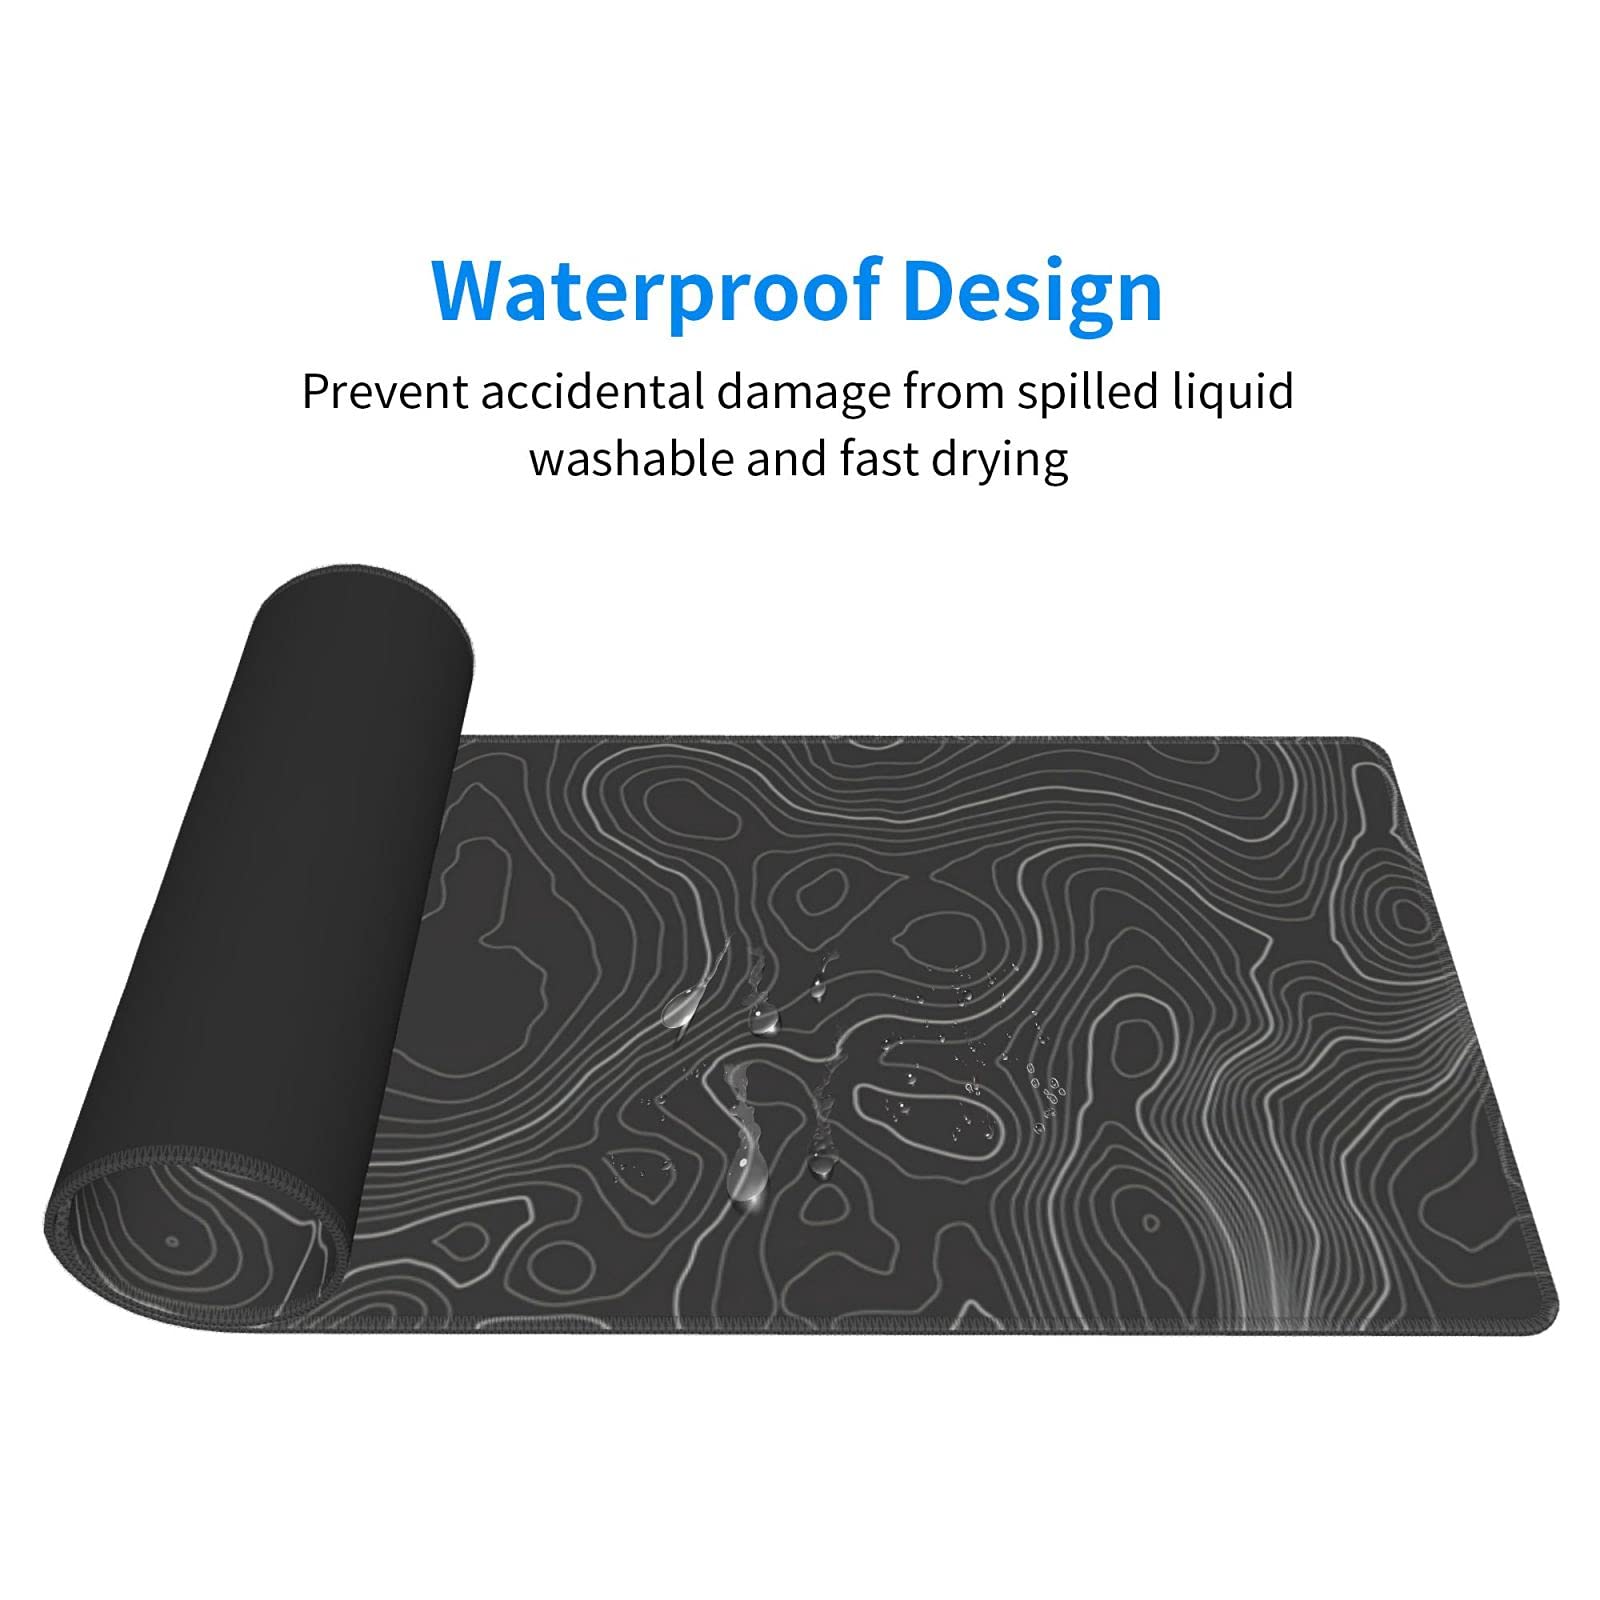 Echoserein,Topographic Contour Gaming Mouse Pad Large XL Long Extended Pads Big Mousepad Keyboard Mouse Mat Desk Pad Home Office Decor Accessories for Computer Pc Laptop,Rubber